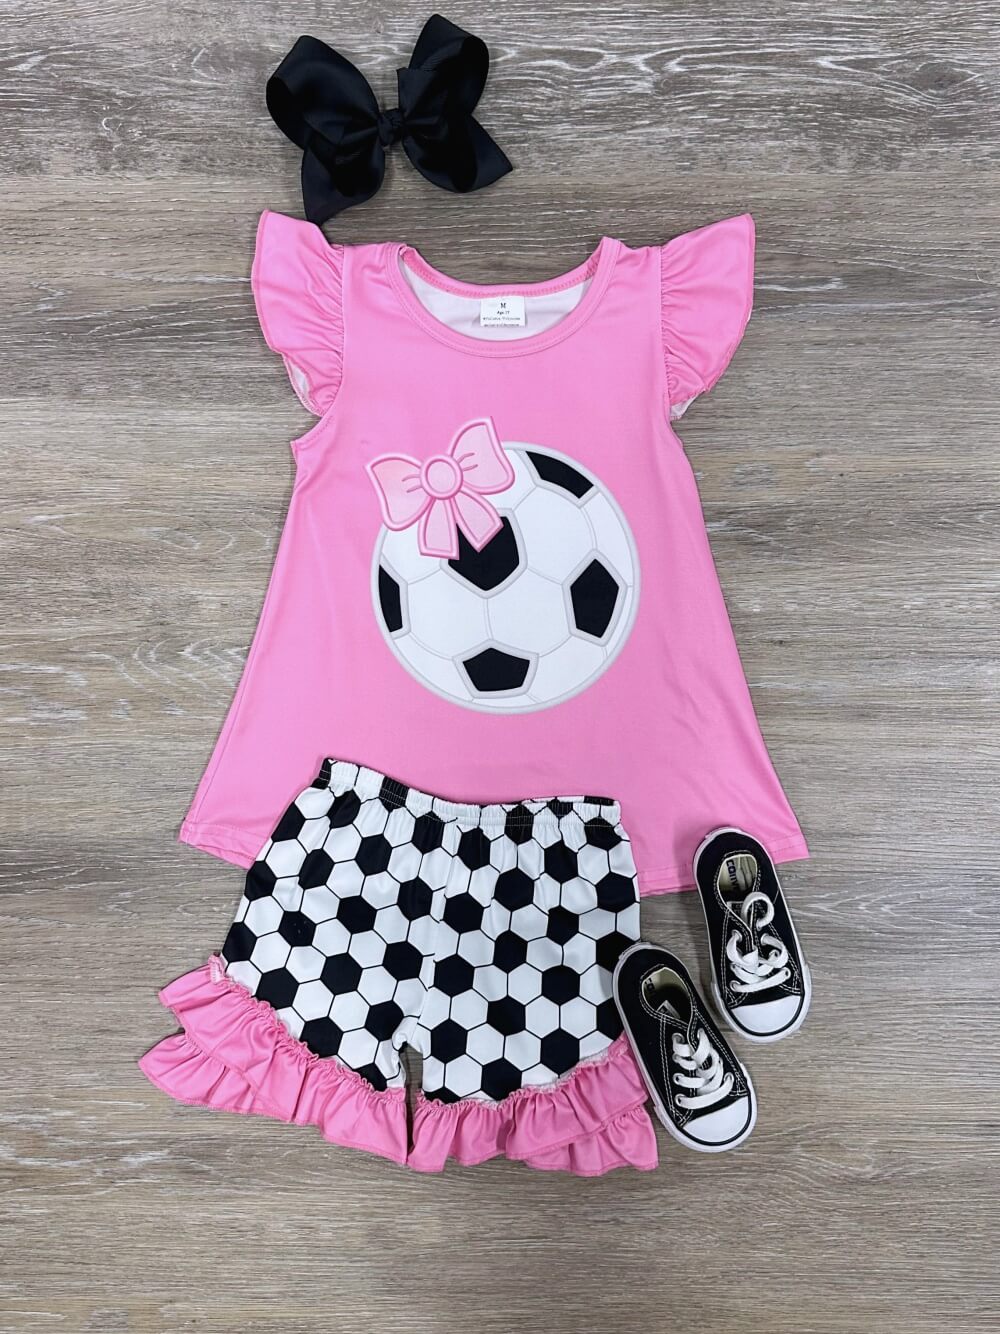 Soccer Star Pink Ruffle Girls Shorts Outfit